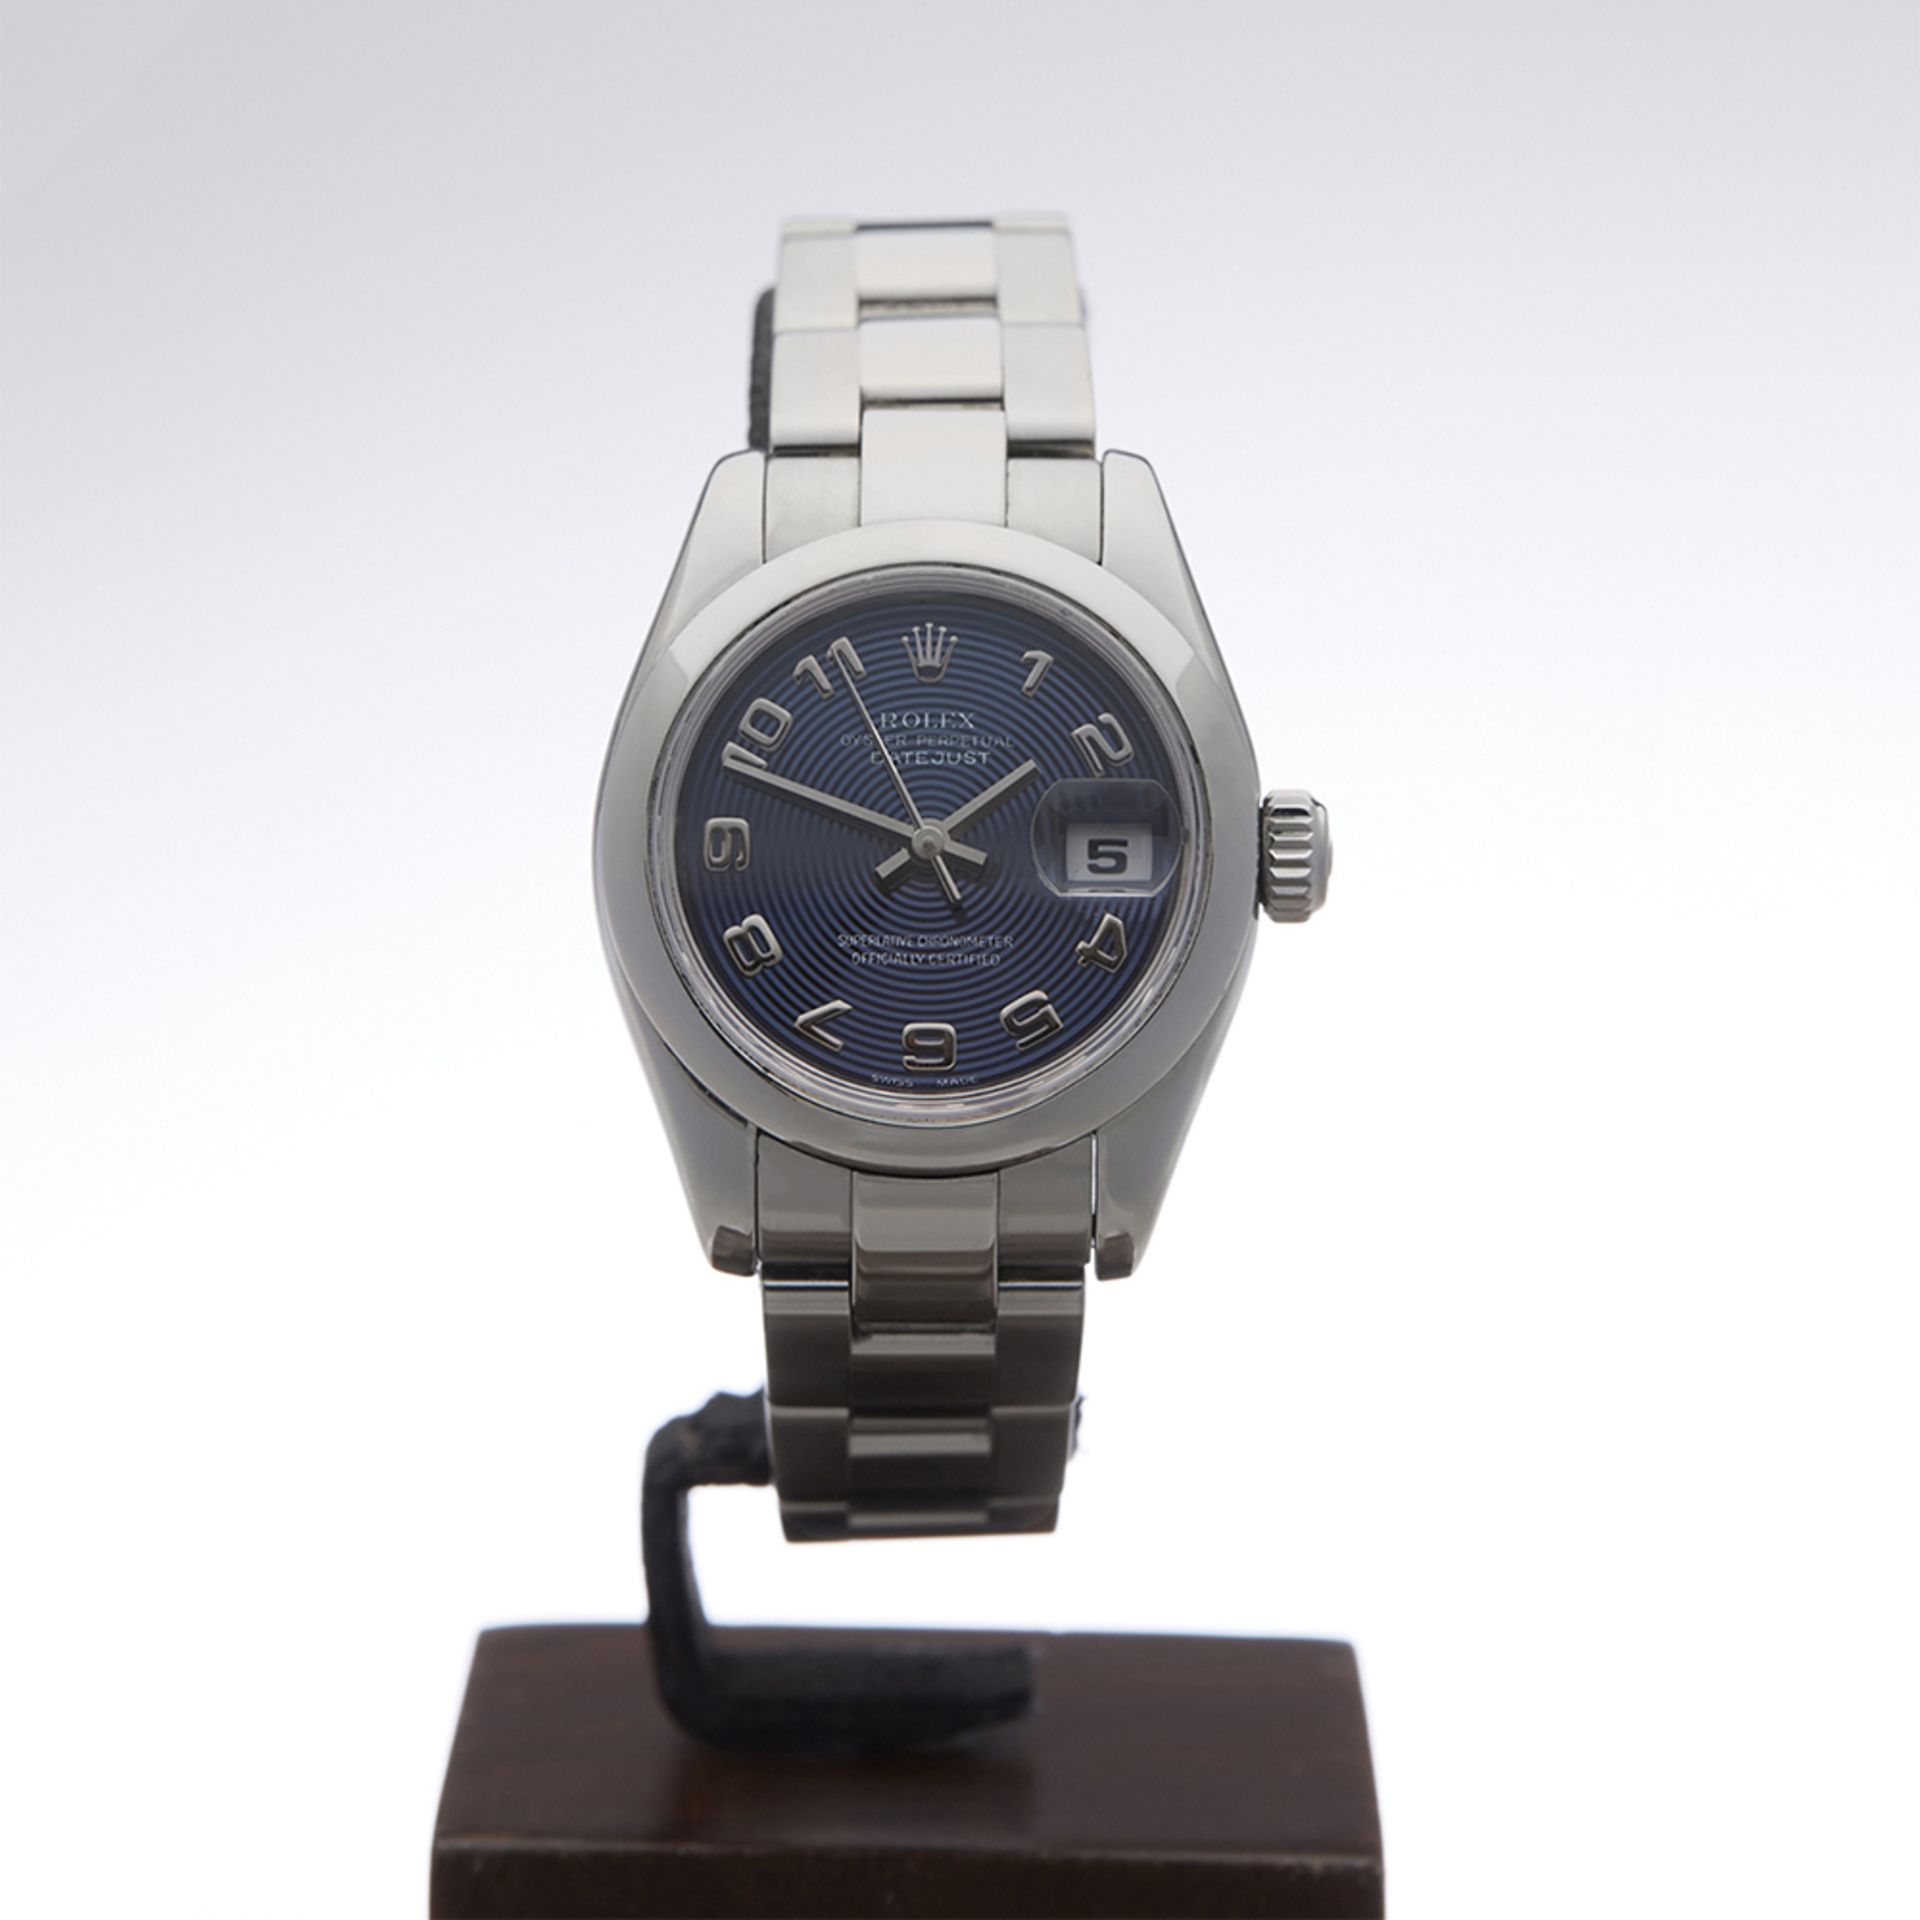 Rolex Datejust 26mm Stainless Steel - 179160 - Image 2 of 9